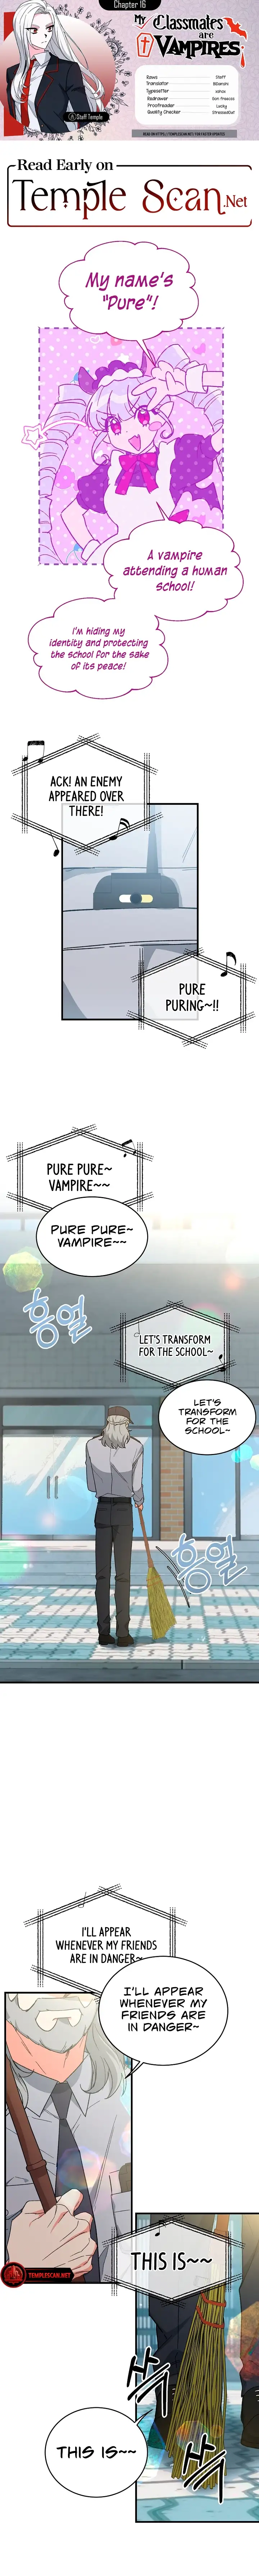 My Classmates Are Vampires! - Page 1